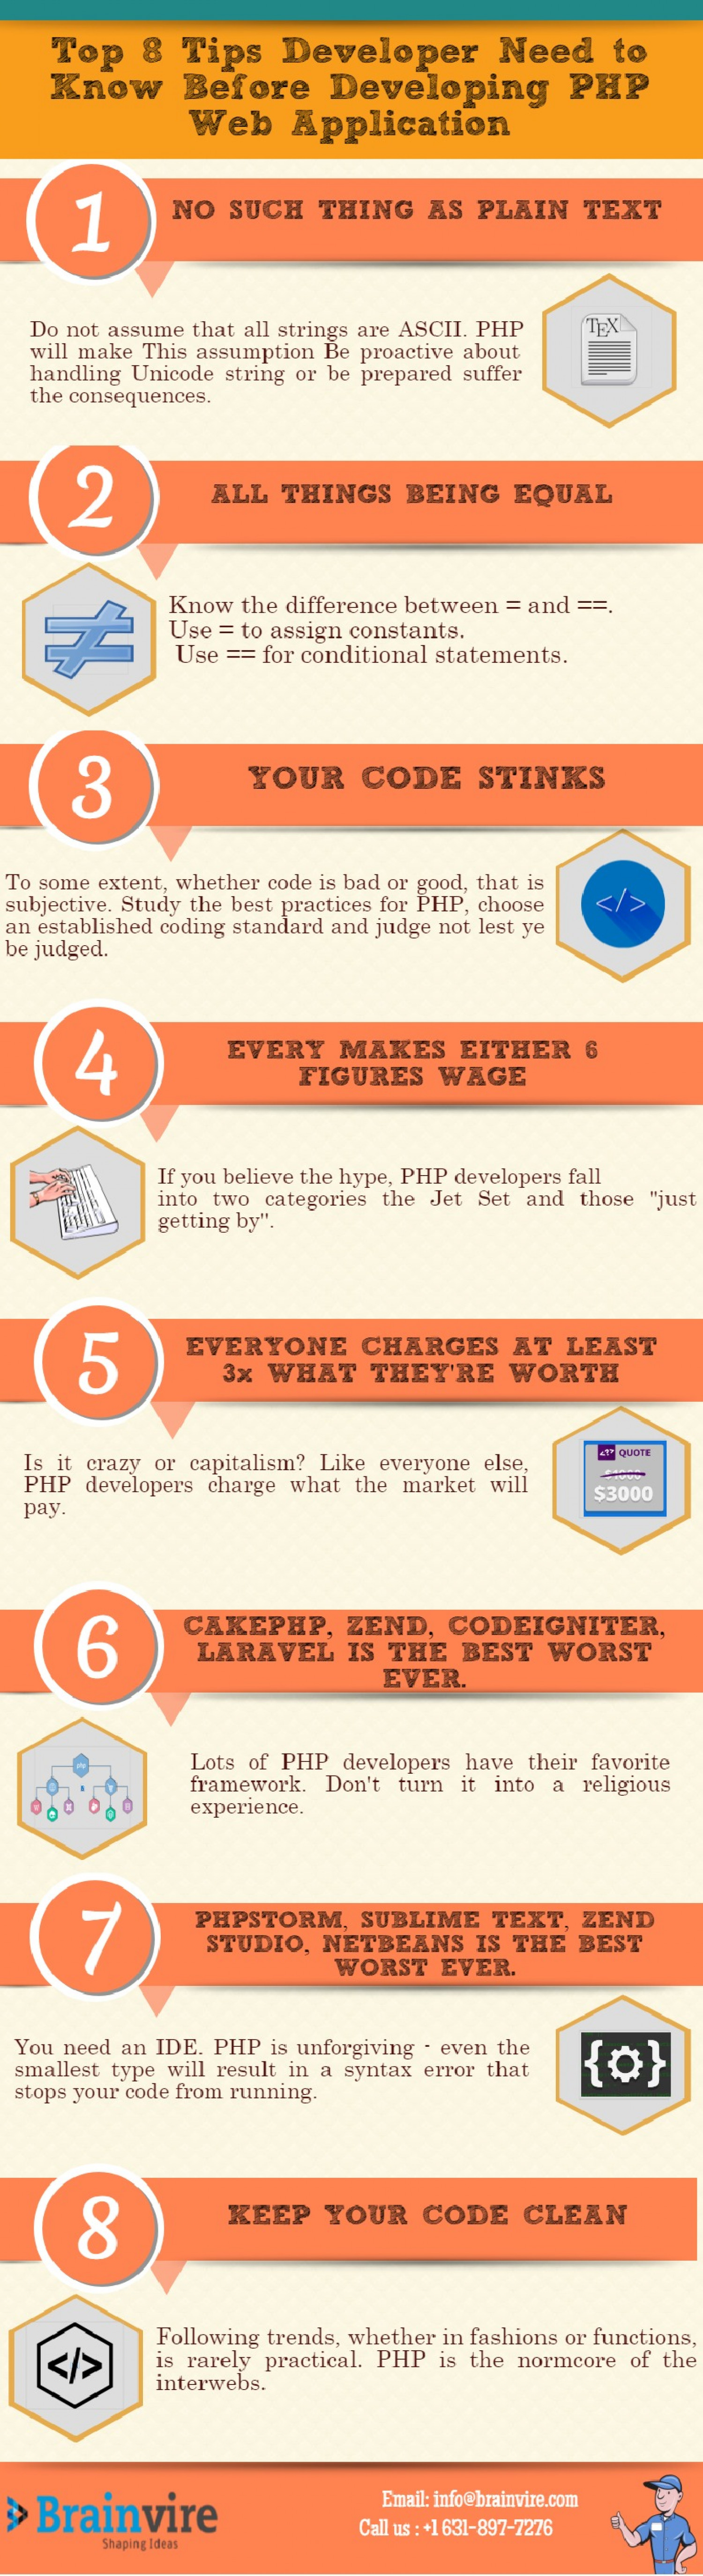 Top 8 Tips Developer Need to Know Before Developing PHP Web Application Infographic